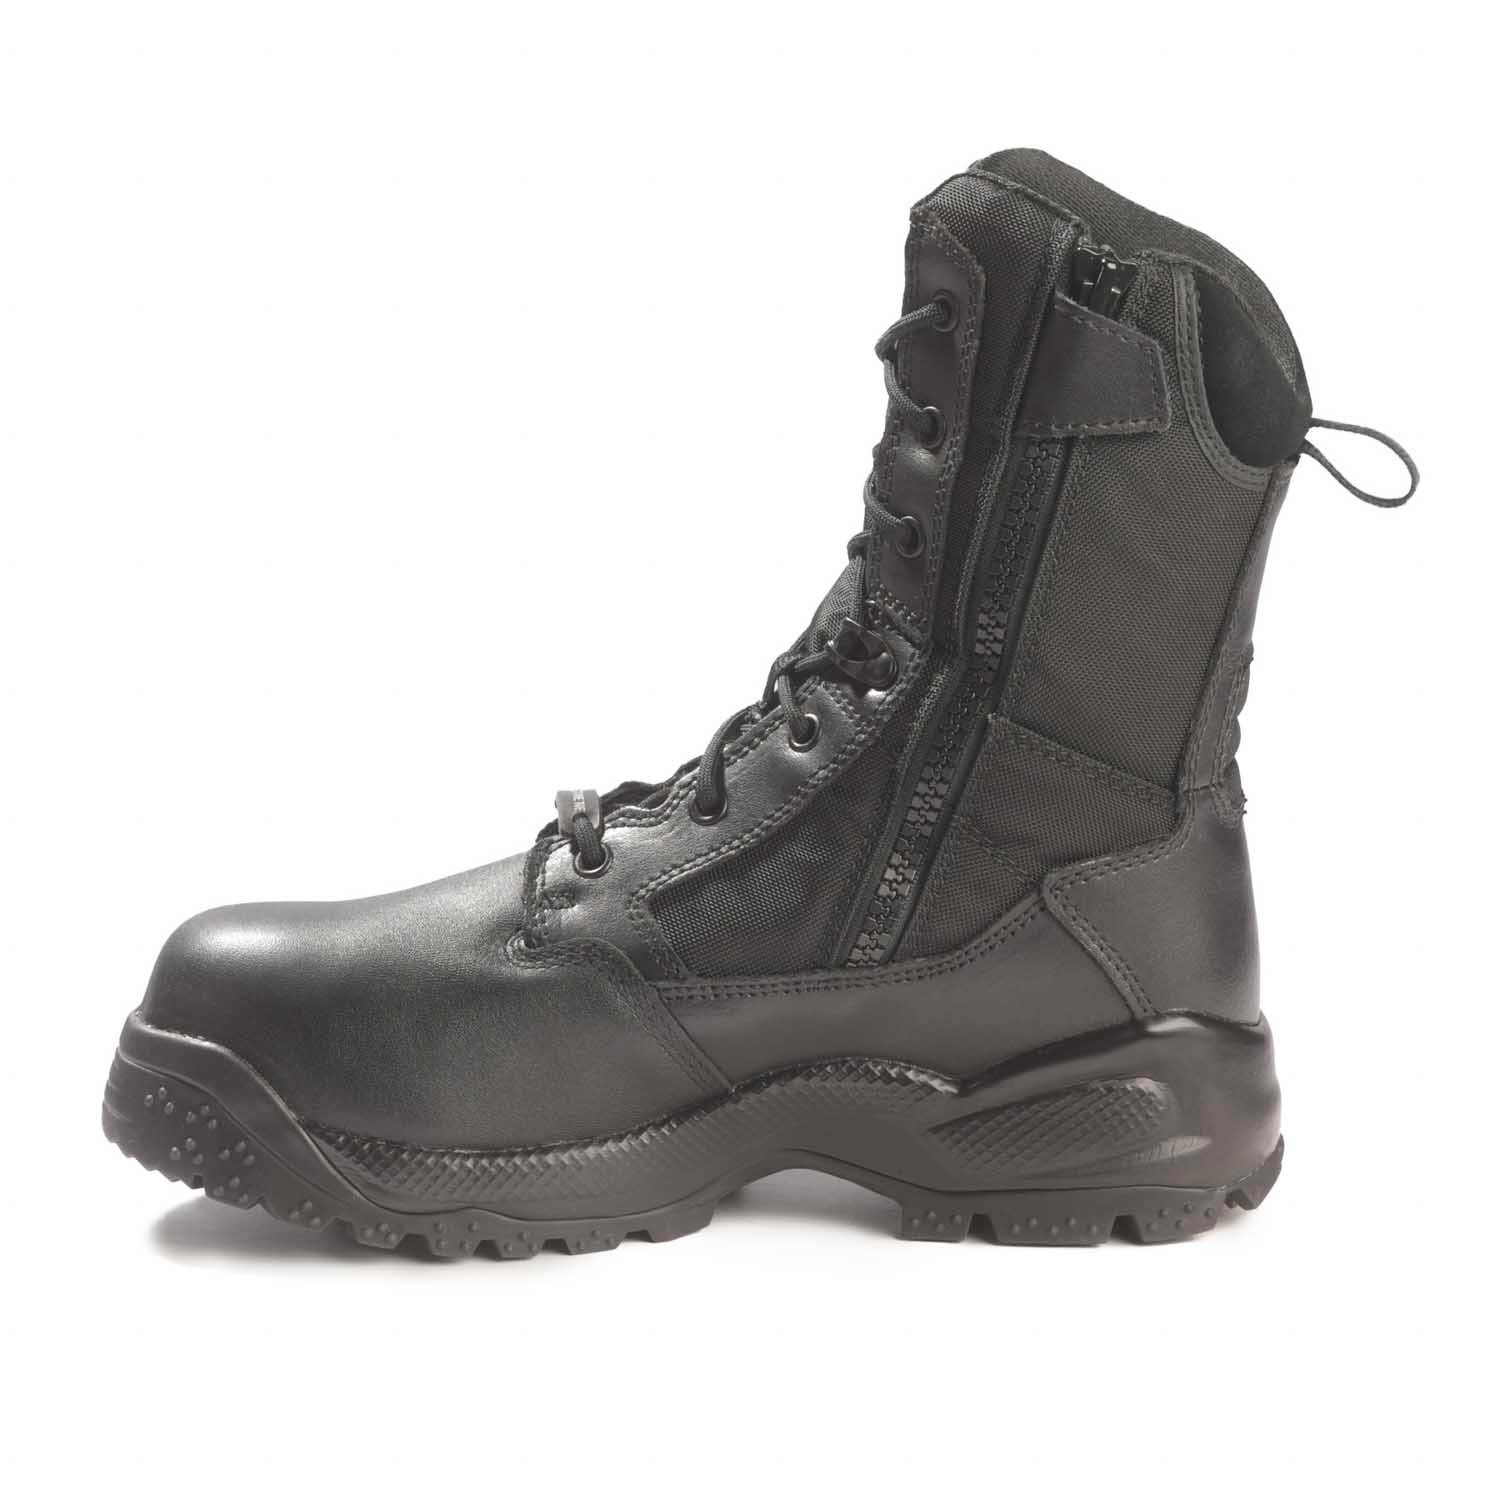 5.11 atac shield boots,Save up to 17%,www.ilcascinone.com